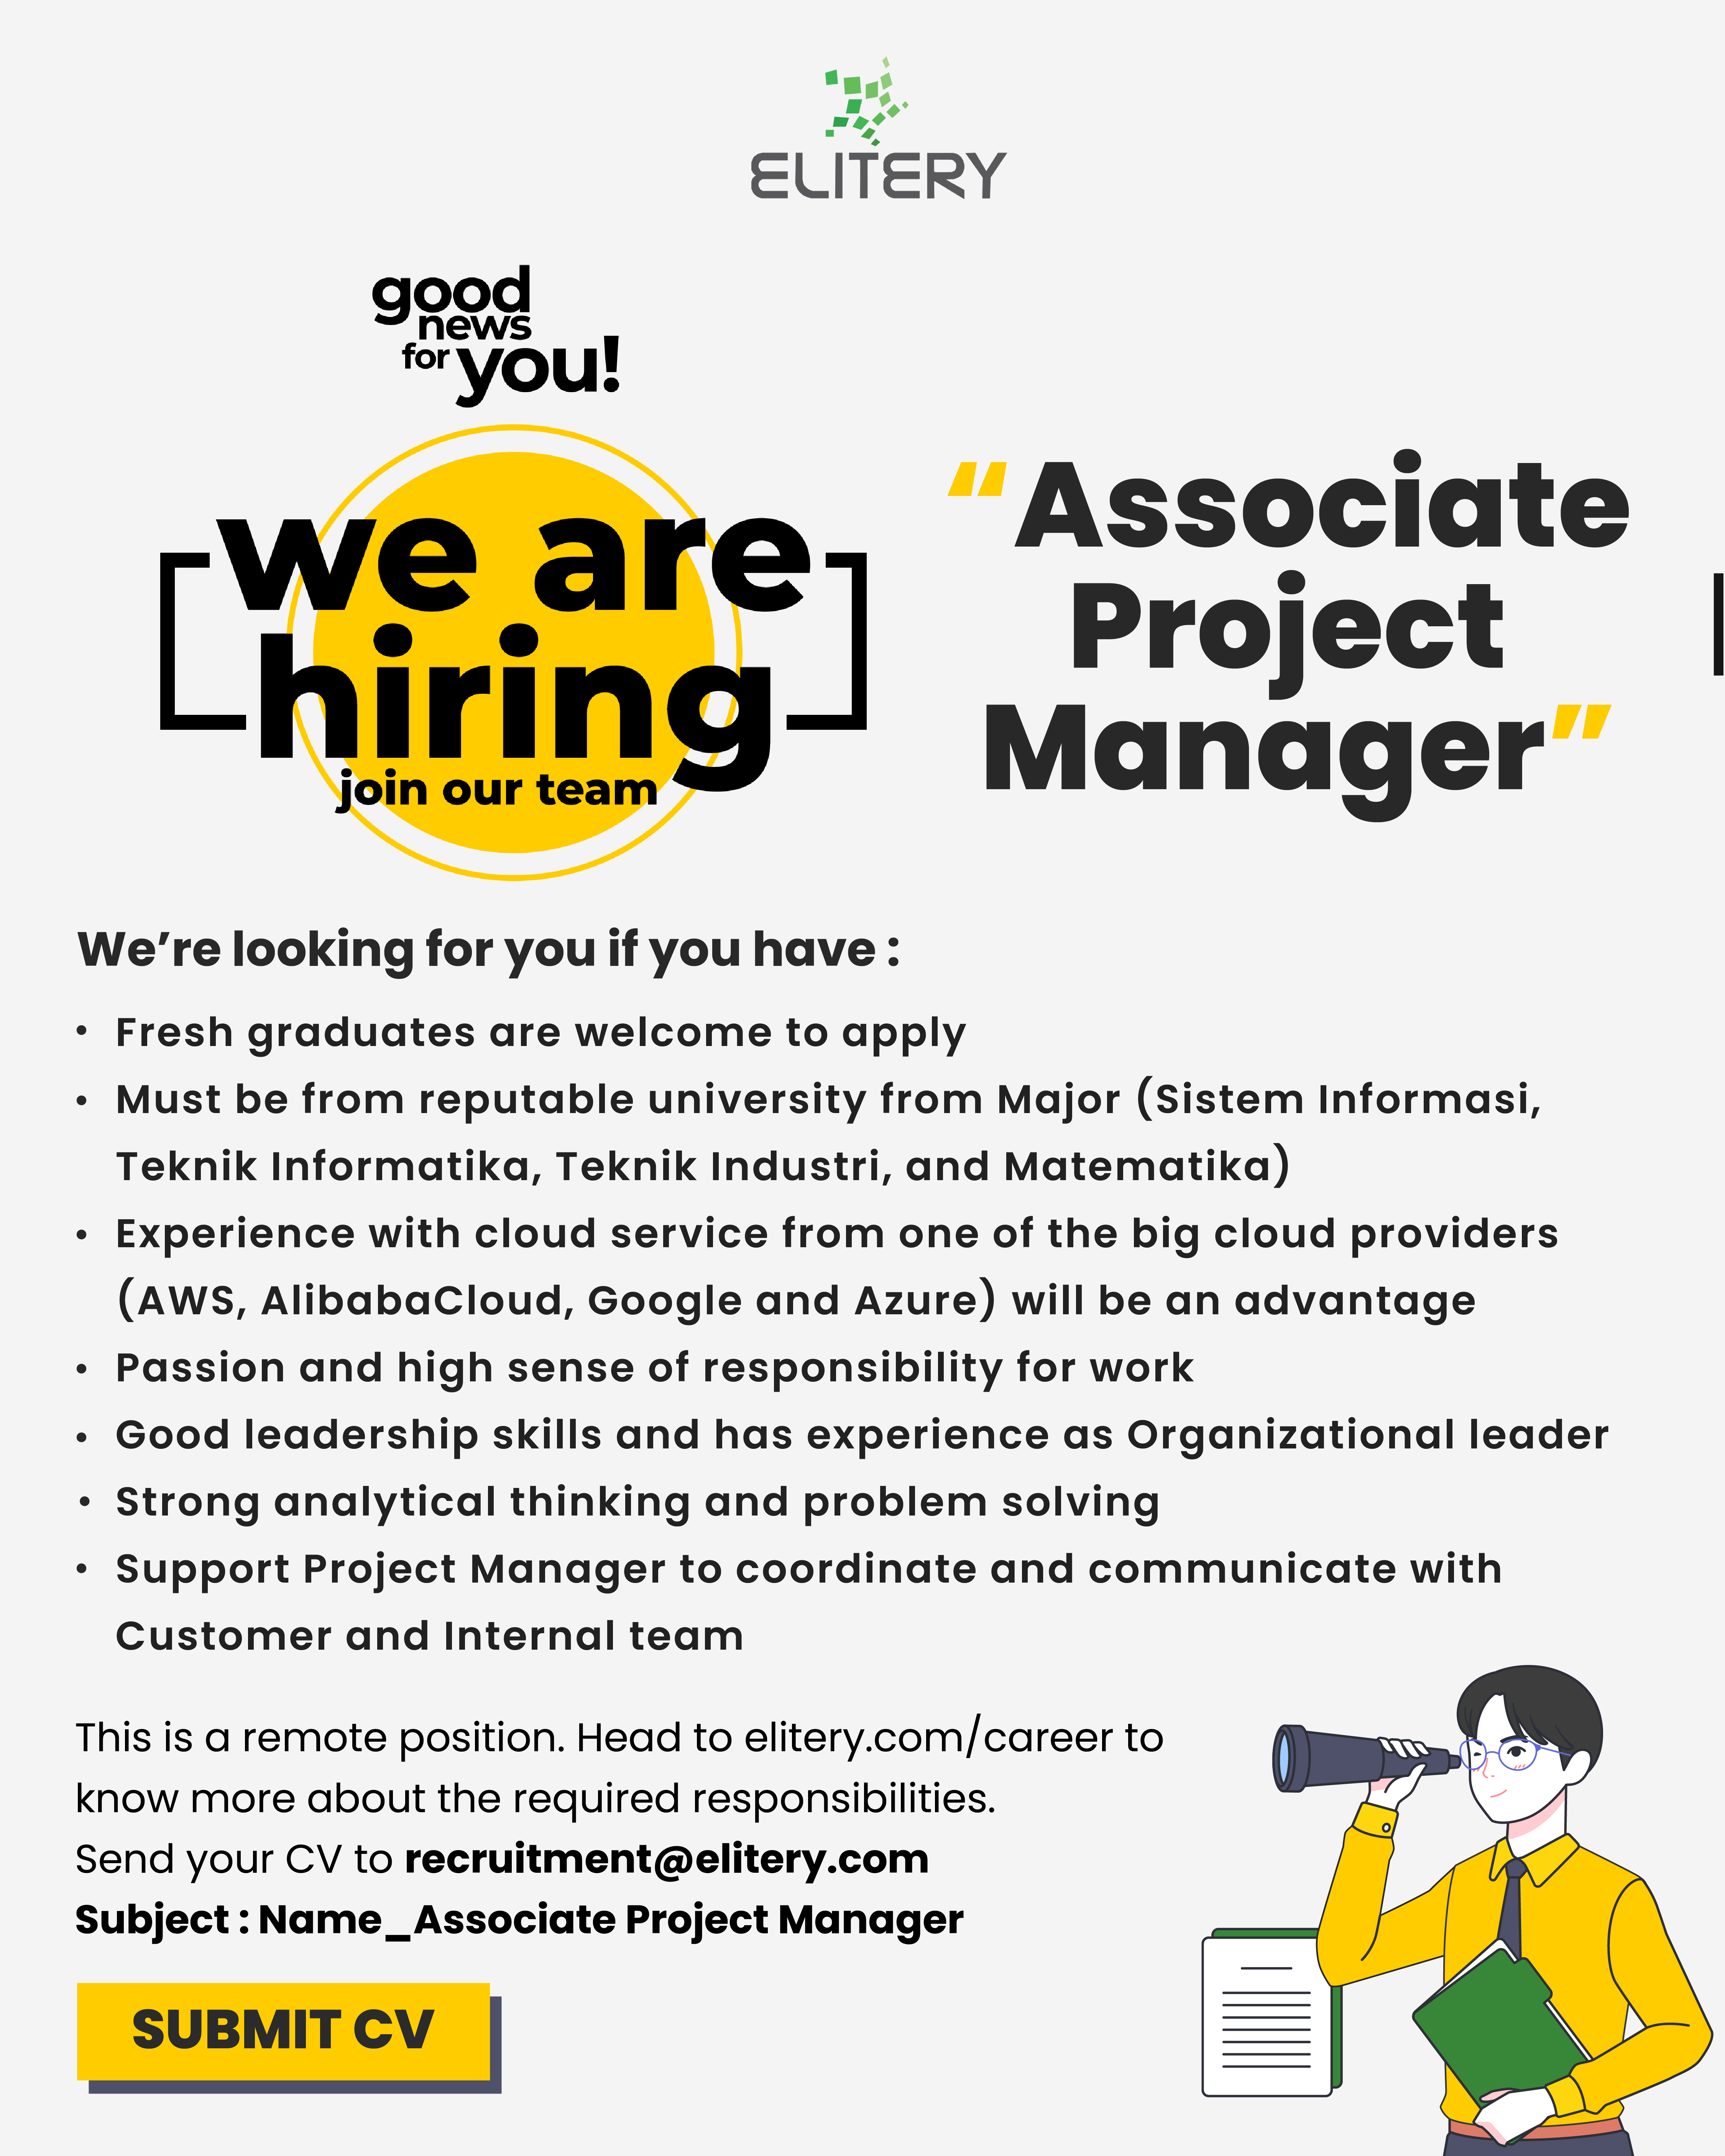 Associated Project Manager-01